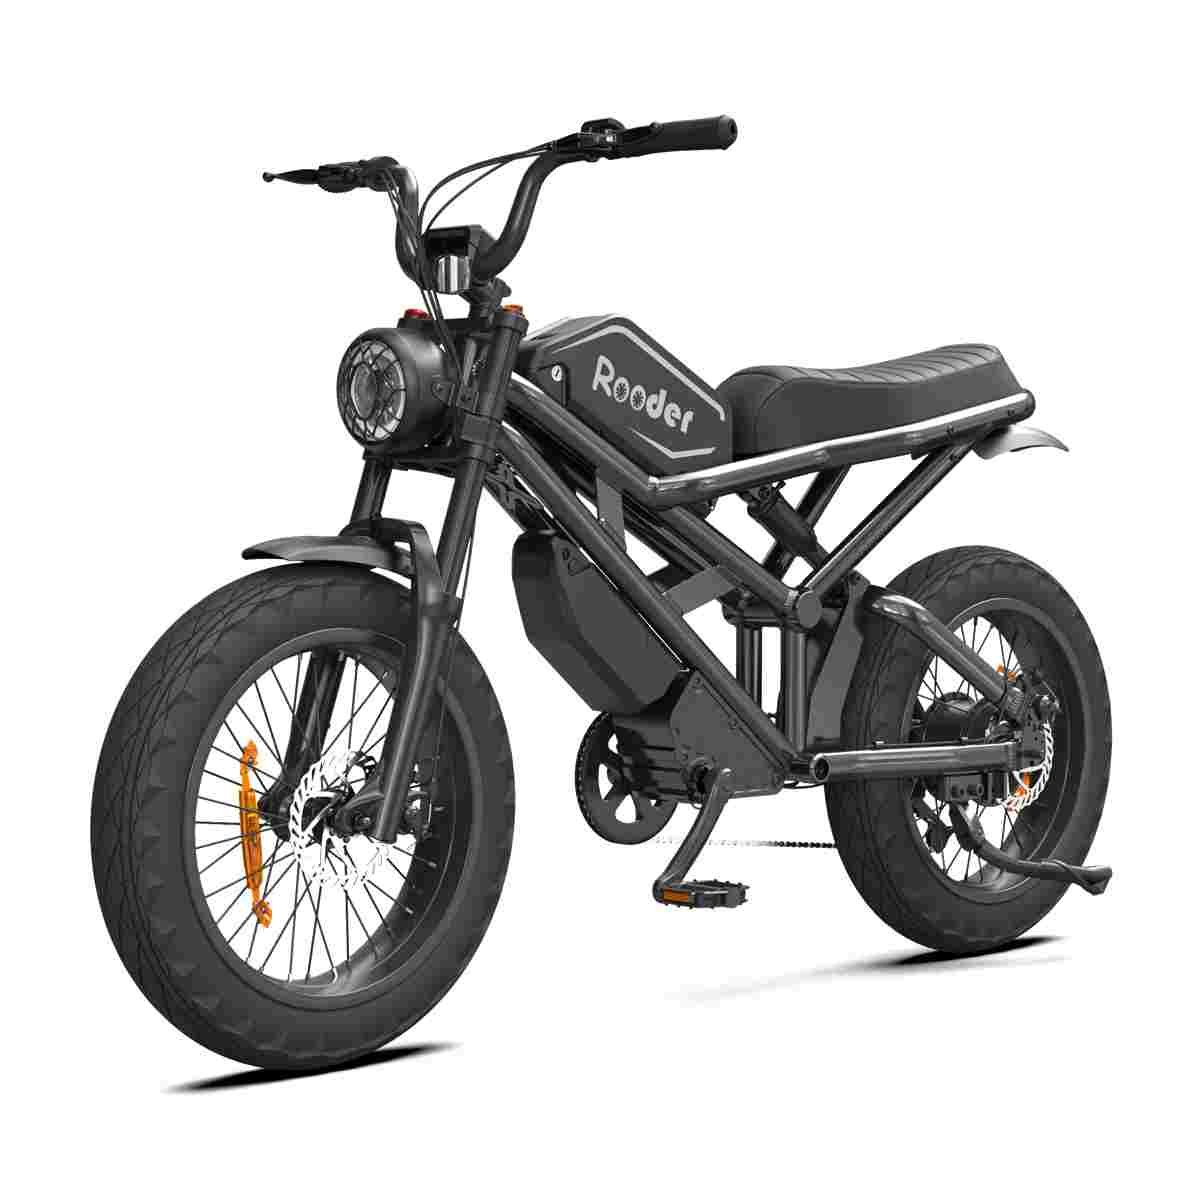 Electric Start Dirt Bike For Sale factory